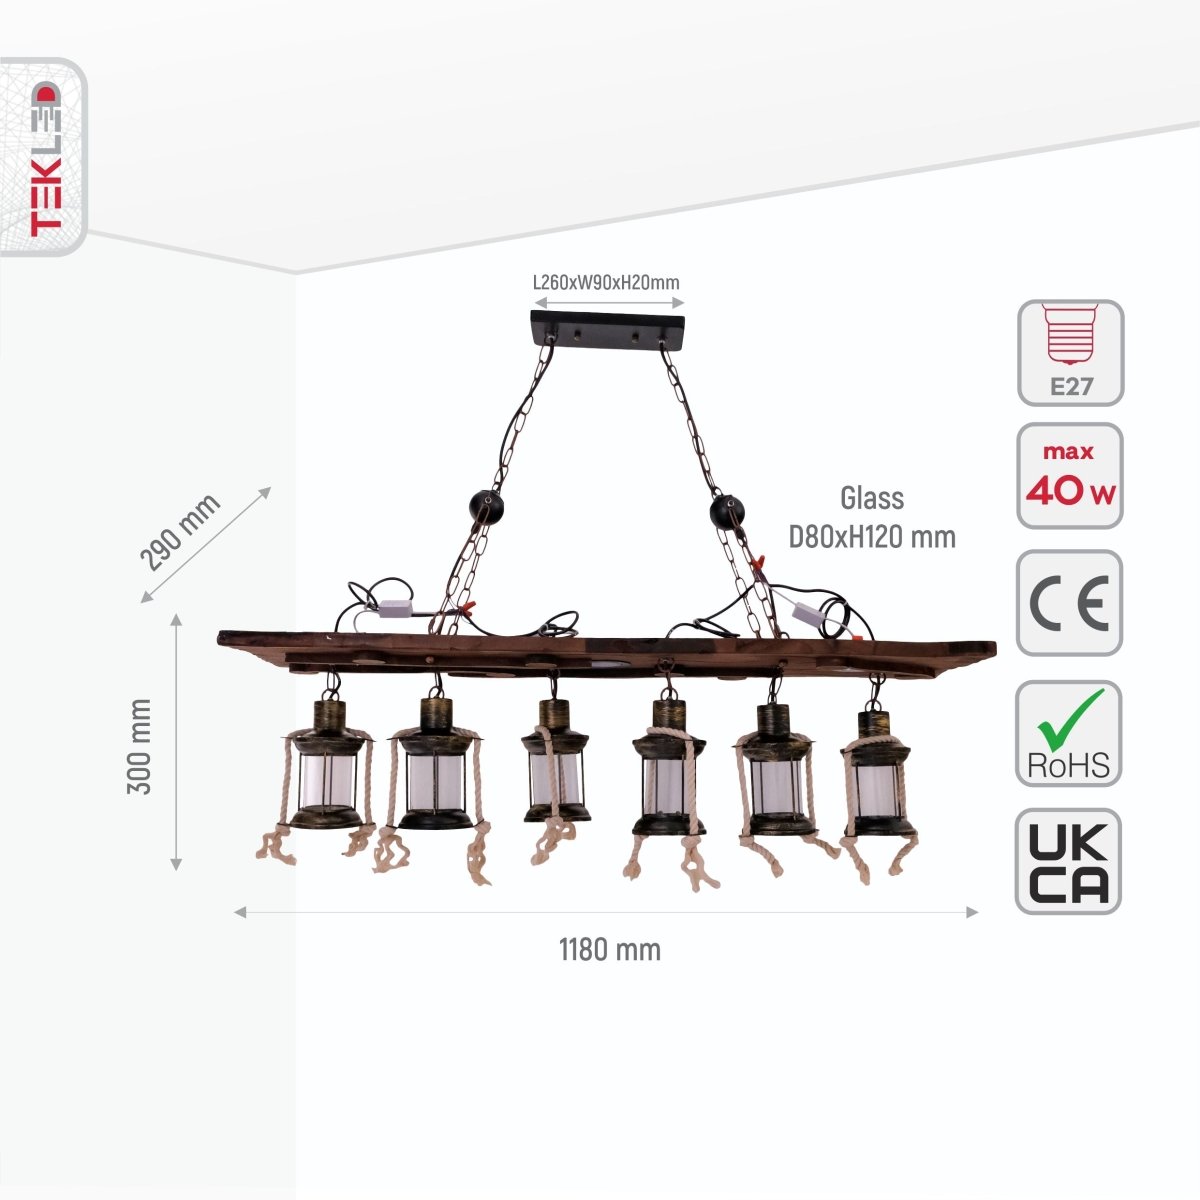 Size and specs of Sailor Wood Board Marine Island Chandelier with 6xE27 Lamp and 3 LED Light | TEKLED 150-18101